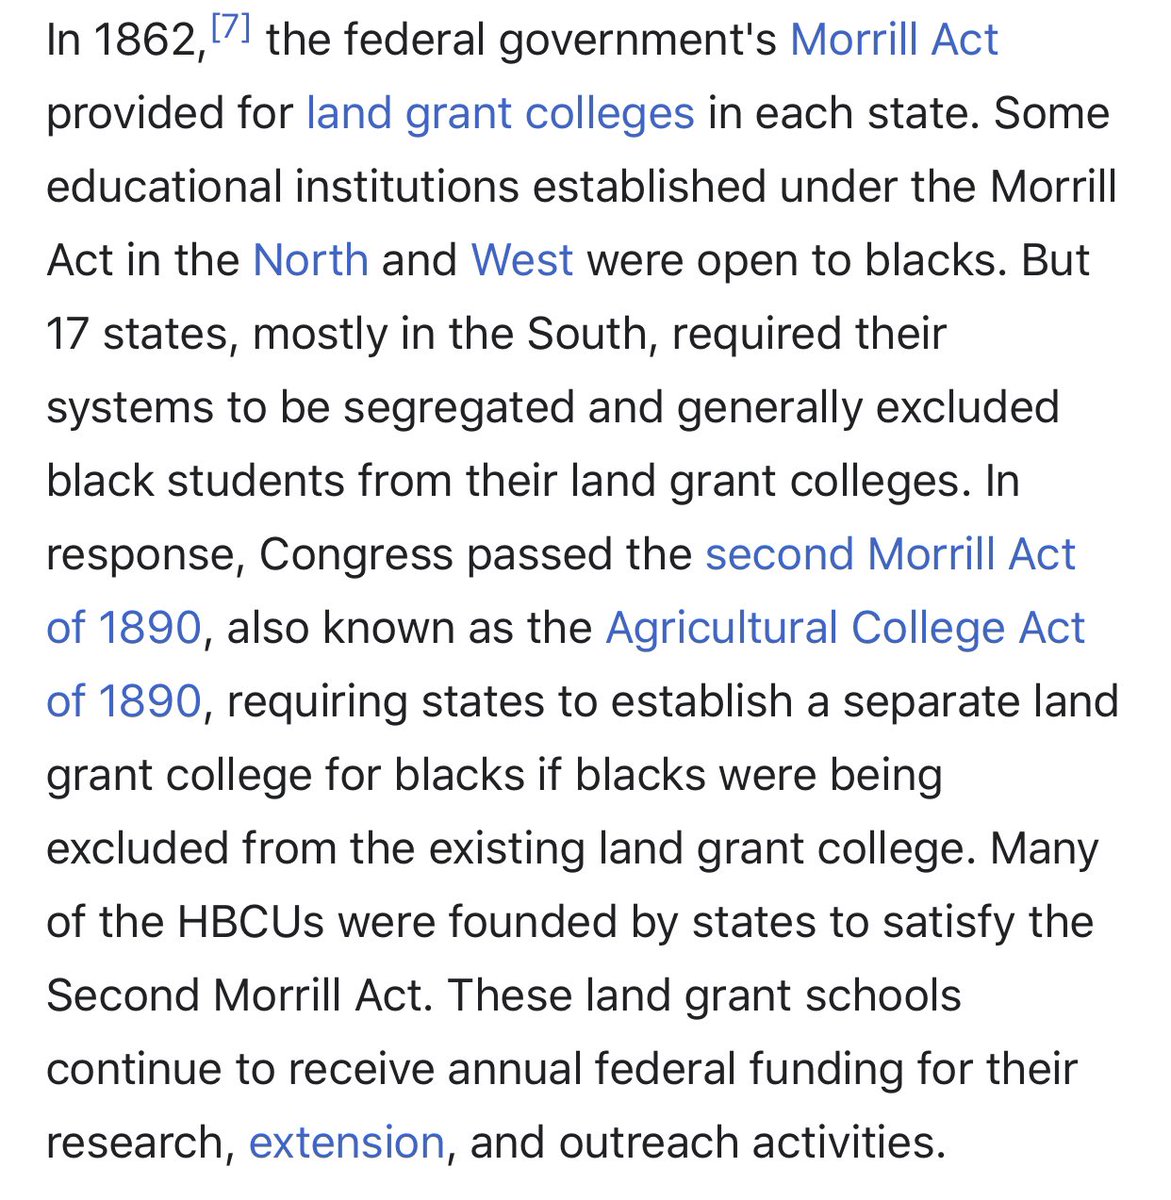 She points out “Howard is not an HBCU. It’s a land grant college that receives direct federal funding”. I disagree that federal funding fully excludes Howard from being considered an HBCU. I thought an HBCU just had to be a school for Black folk established before 1964. But ight.